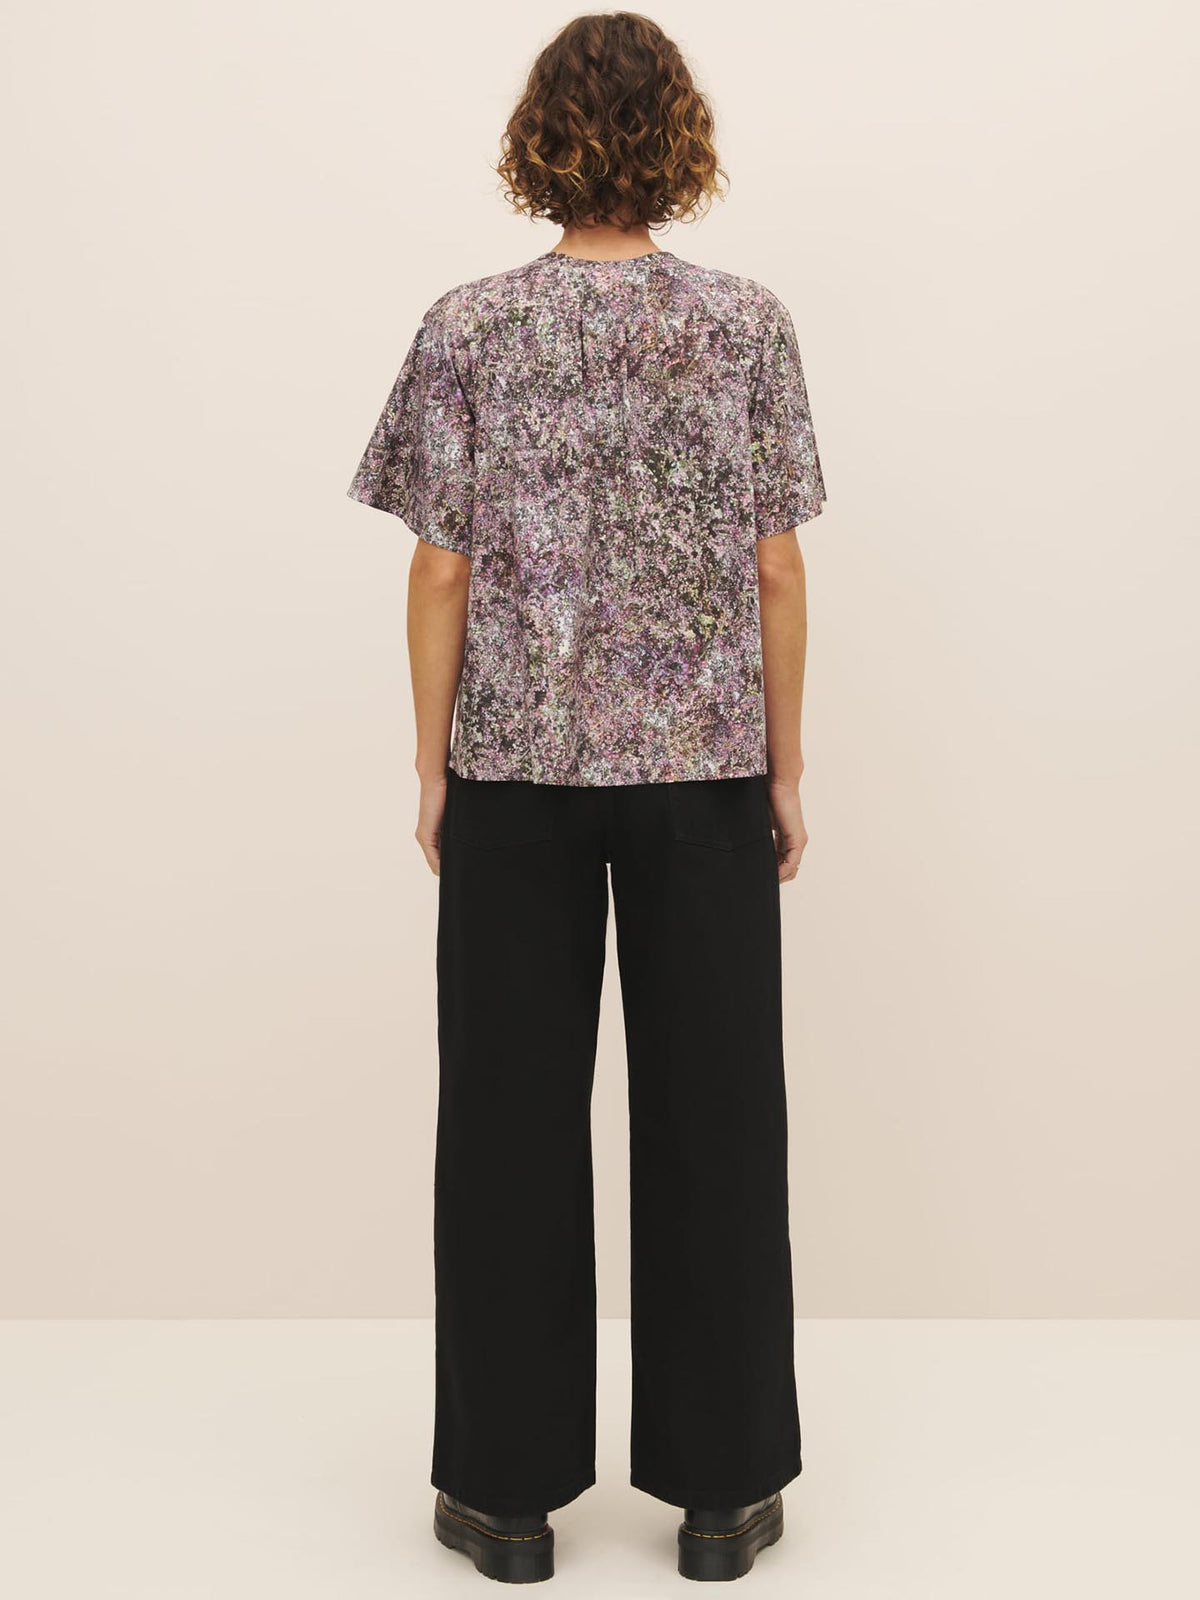 Person standing with their back to the camera, wearing an oversized fit Kowtow Etude Top – Bouquet shirt and black trousers.